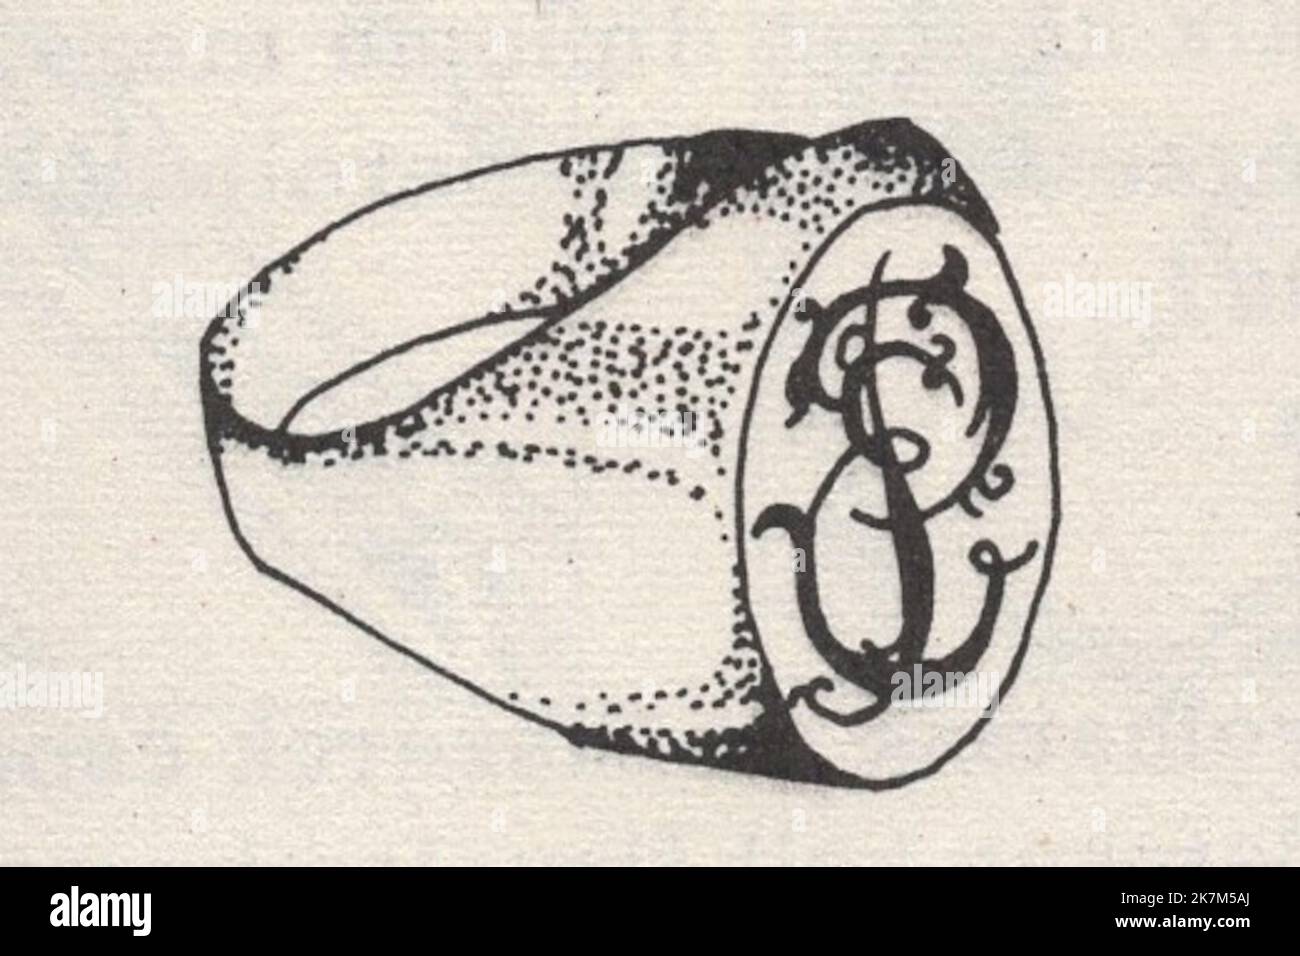 an illustrated collection of engraving techniques, methods and tools from an unknown book : jewellery ring / oval ring  / kaul ring : monogrammed ring / engraved ring / PE monogram Stock Photo